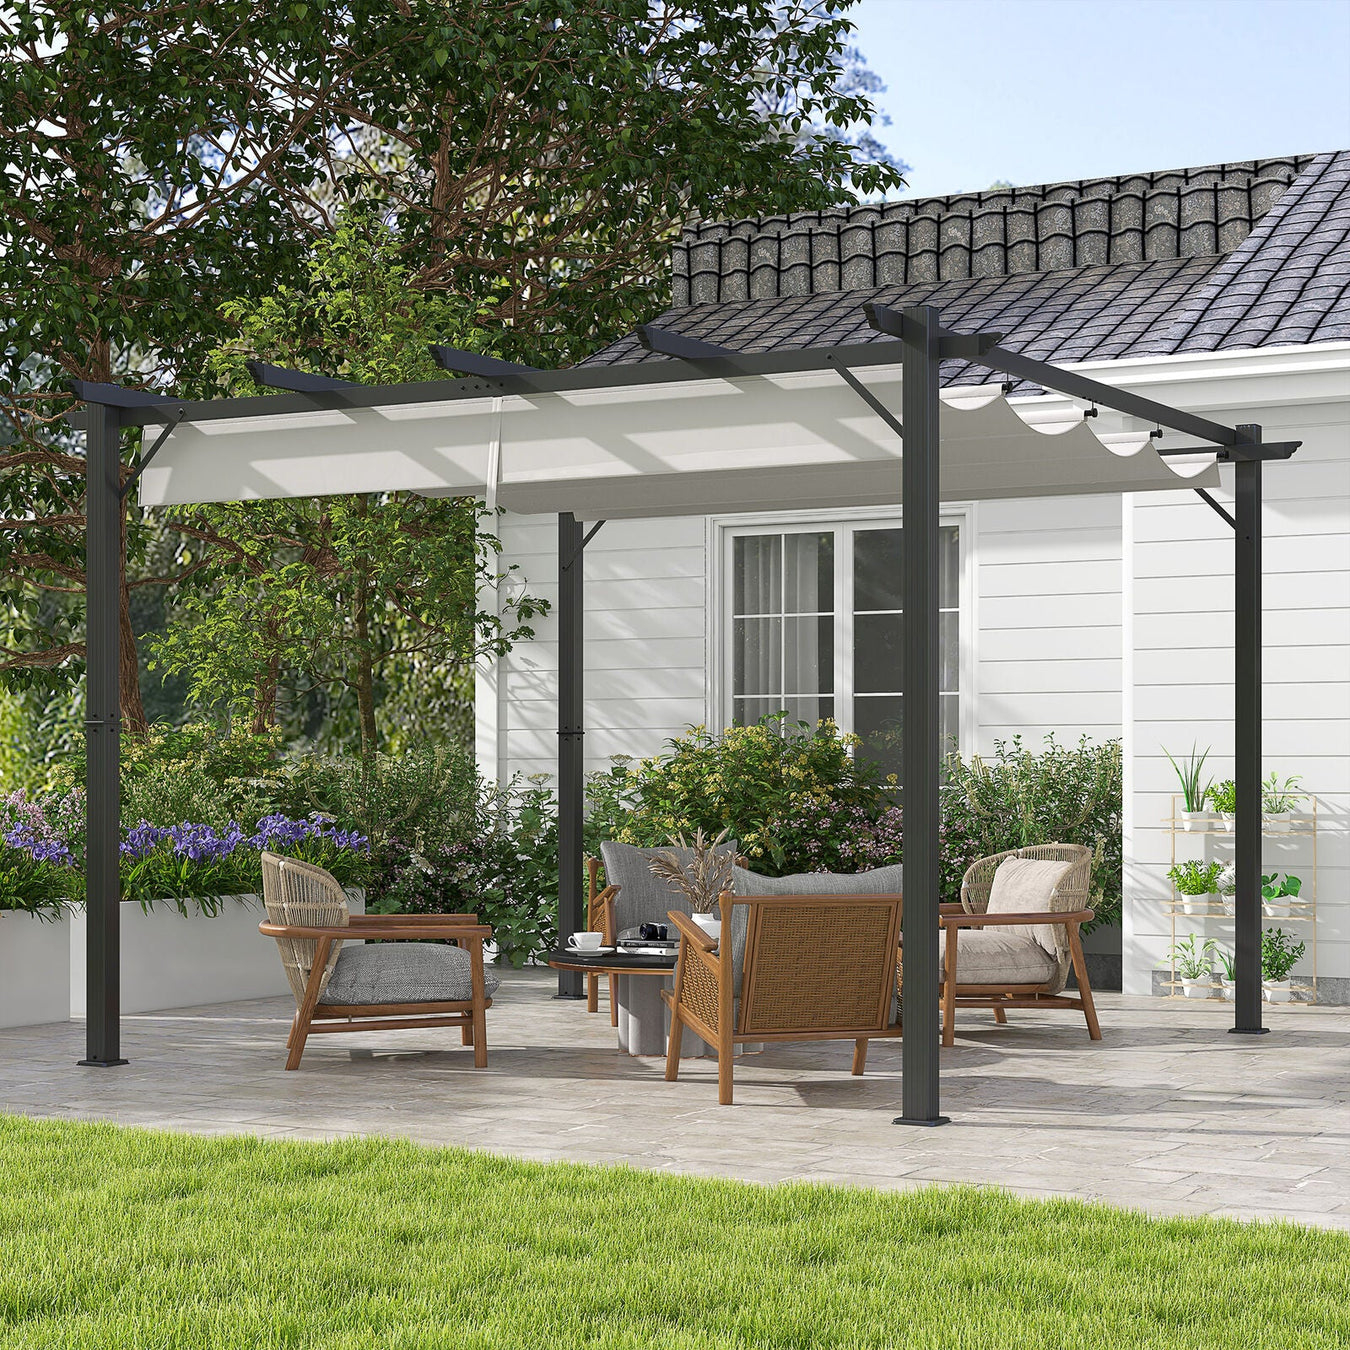 A free standing pergola with grey retractable roof on patio